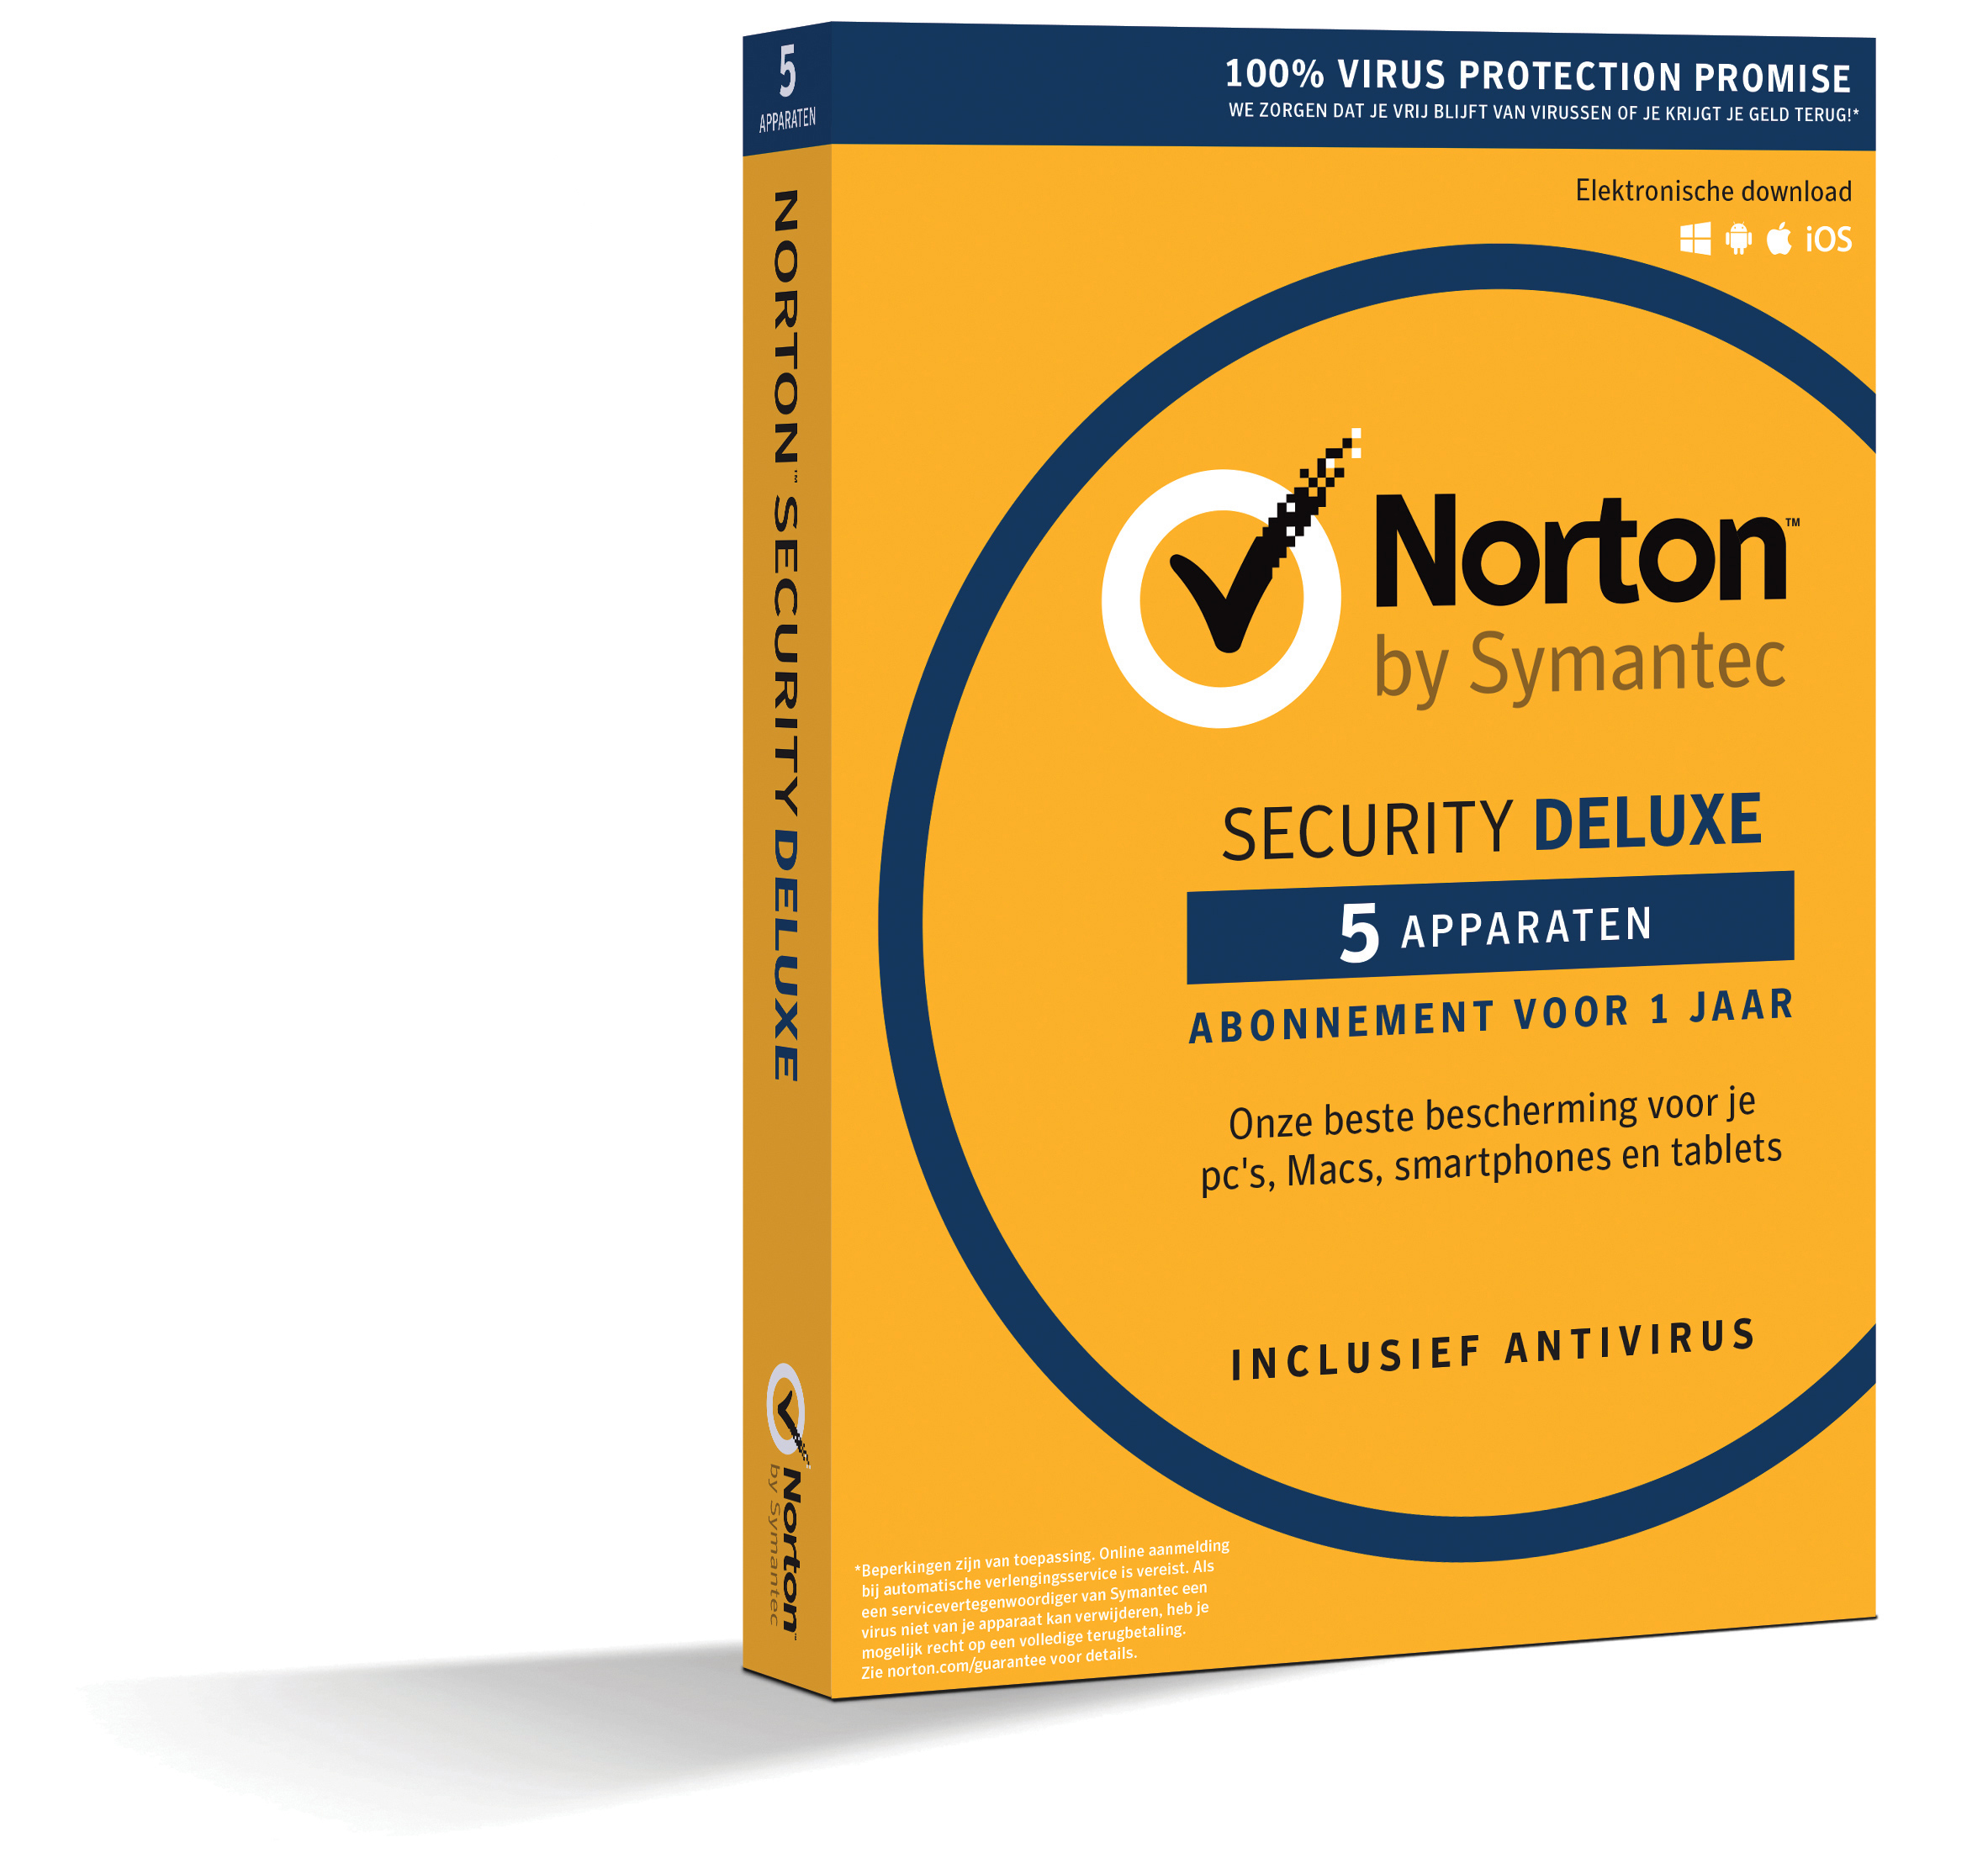 Norton - Security Deluxe - 5 Devices. 1Year Subscription